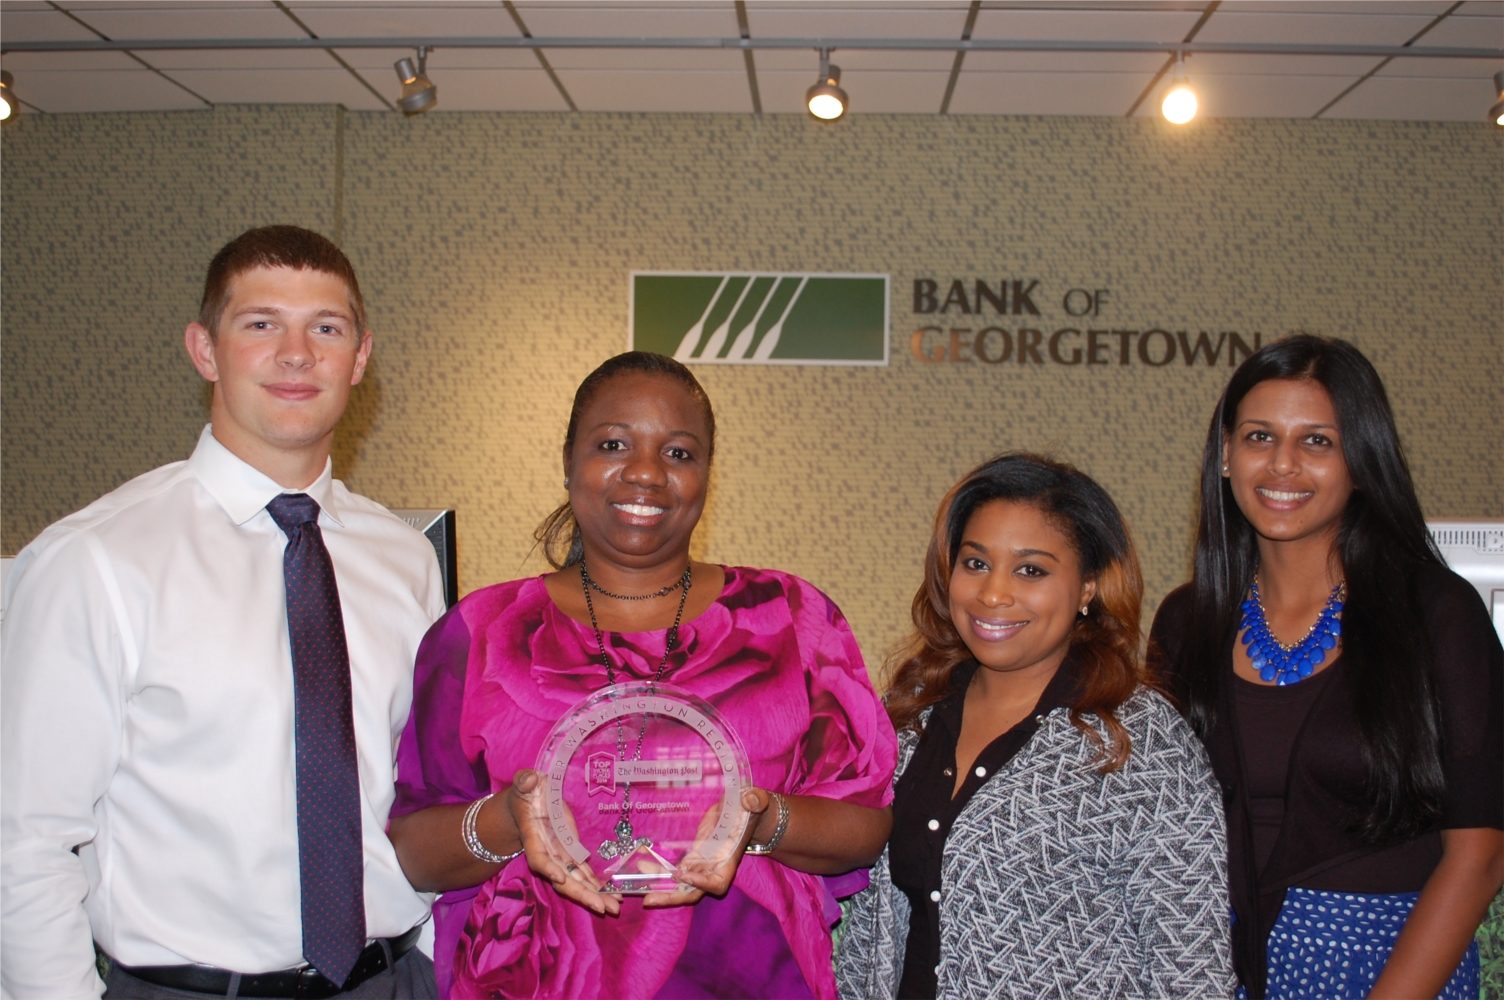 Shortly after Bank of Georgetown was named a 2014 Top Workplace, a team of employees made surprise visits to the 11 banking locations around MD, DC and VA. They circulated the crystal Top Workplaces award so that every employee could share in the honor and delivered ice cream treats as a bonus!